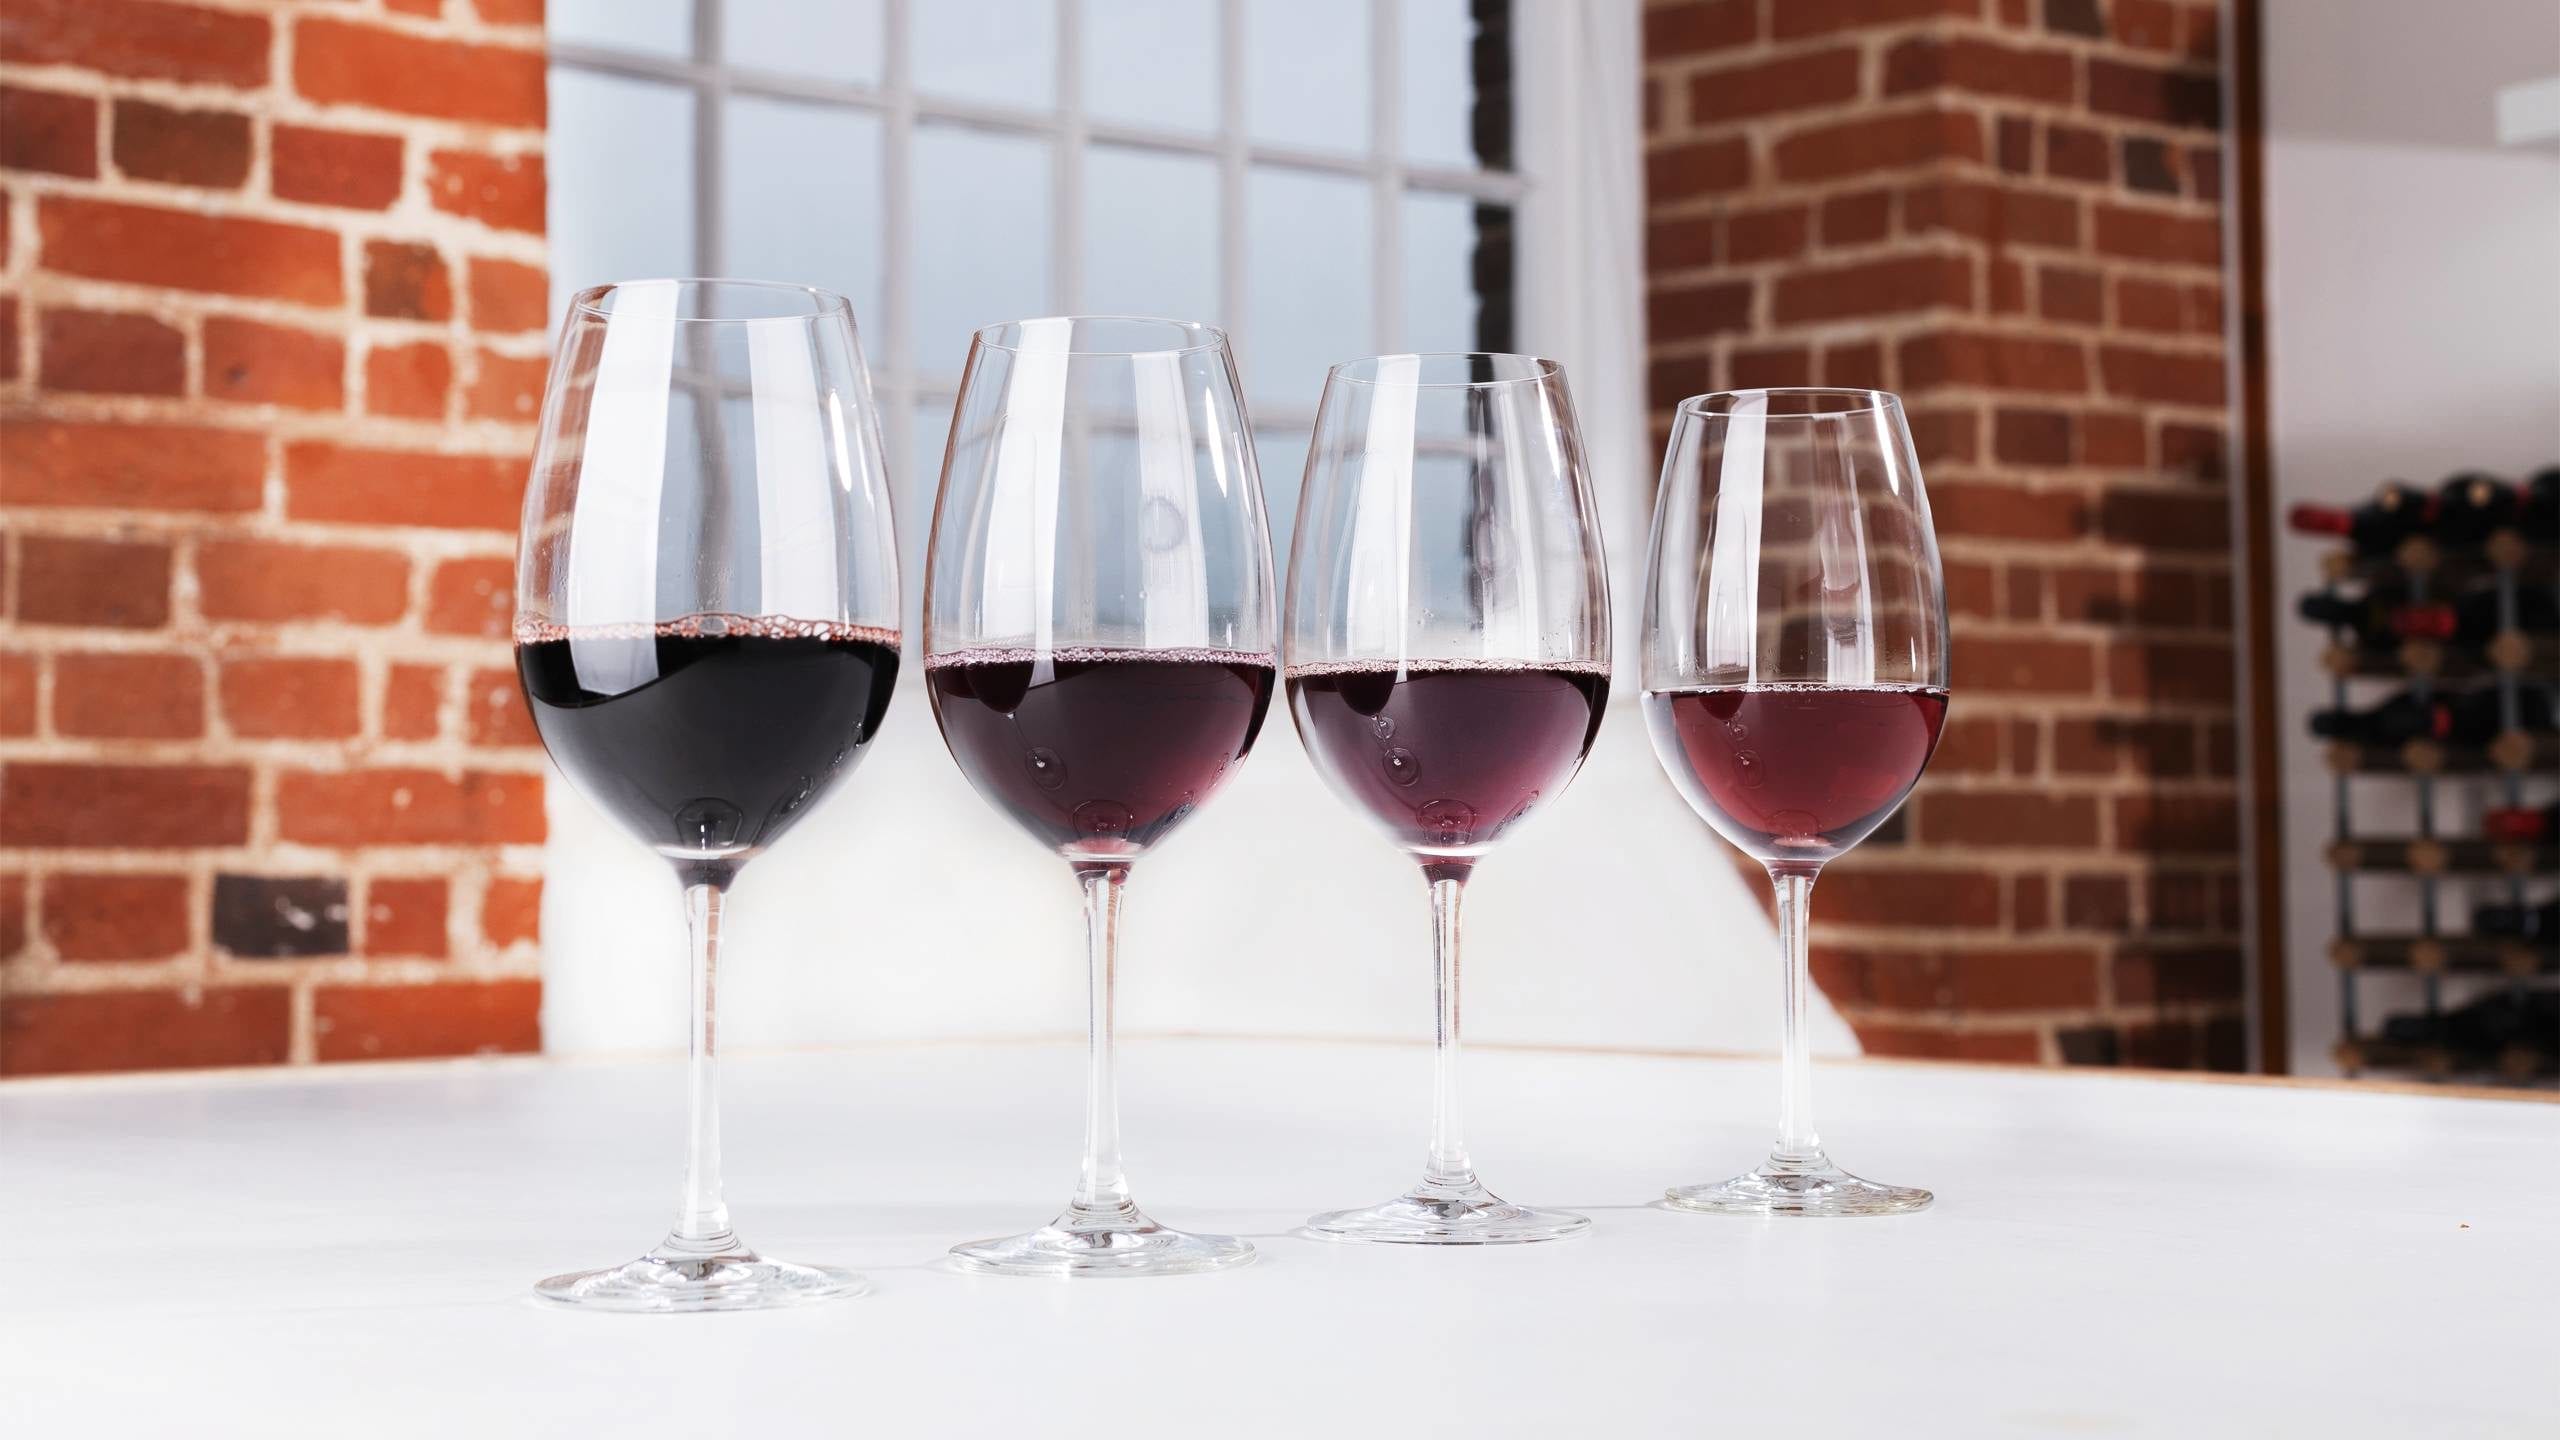 Four glasses of red wine on a table in front of a window and brick wall